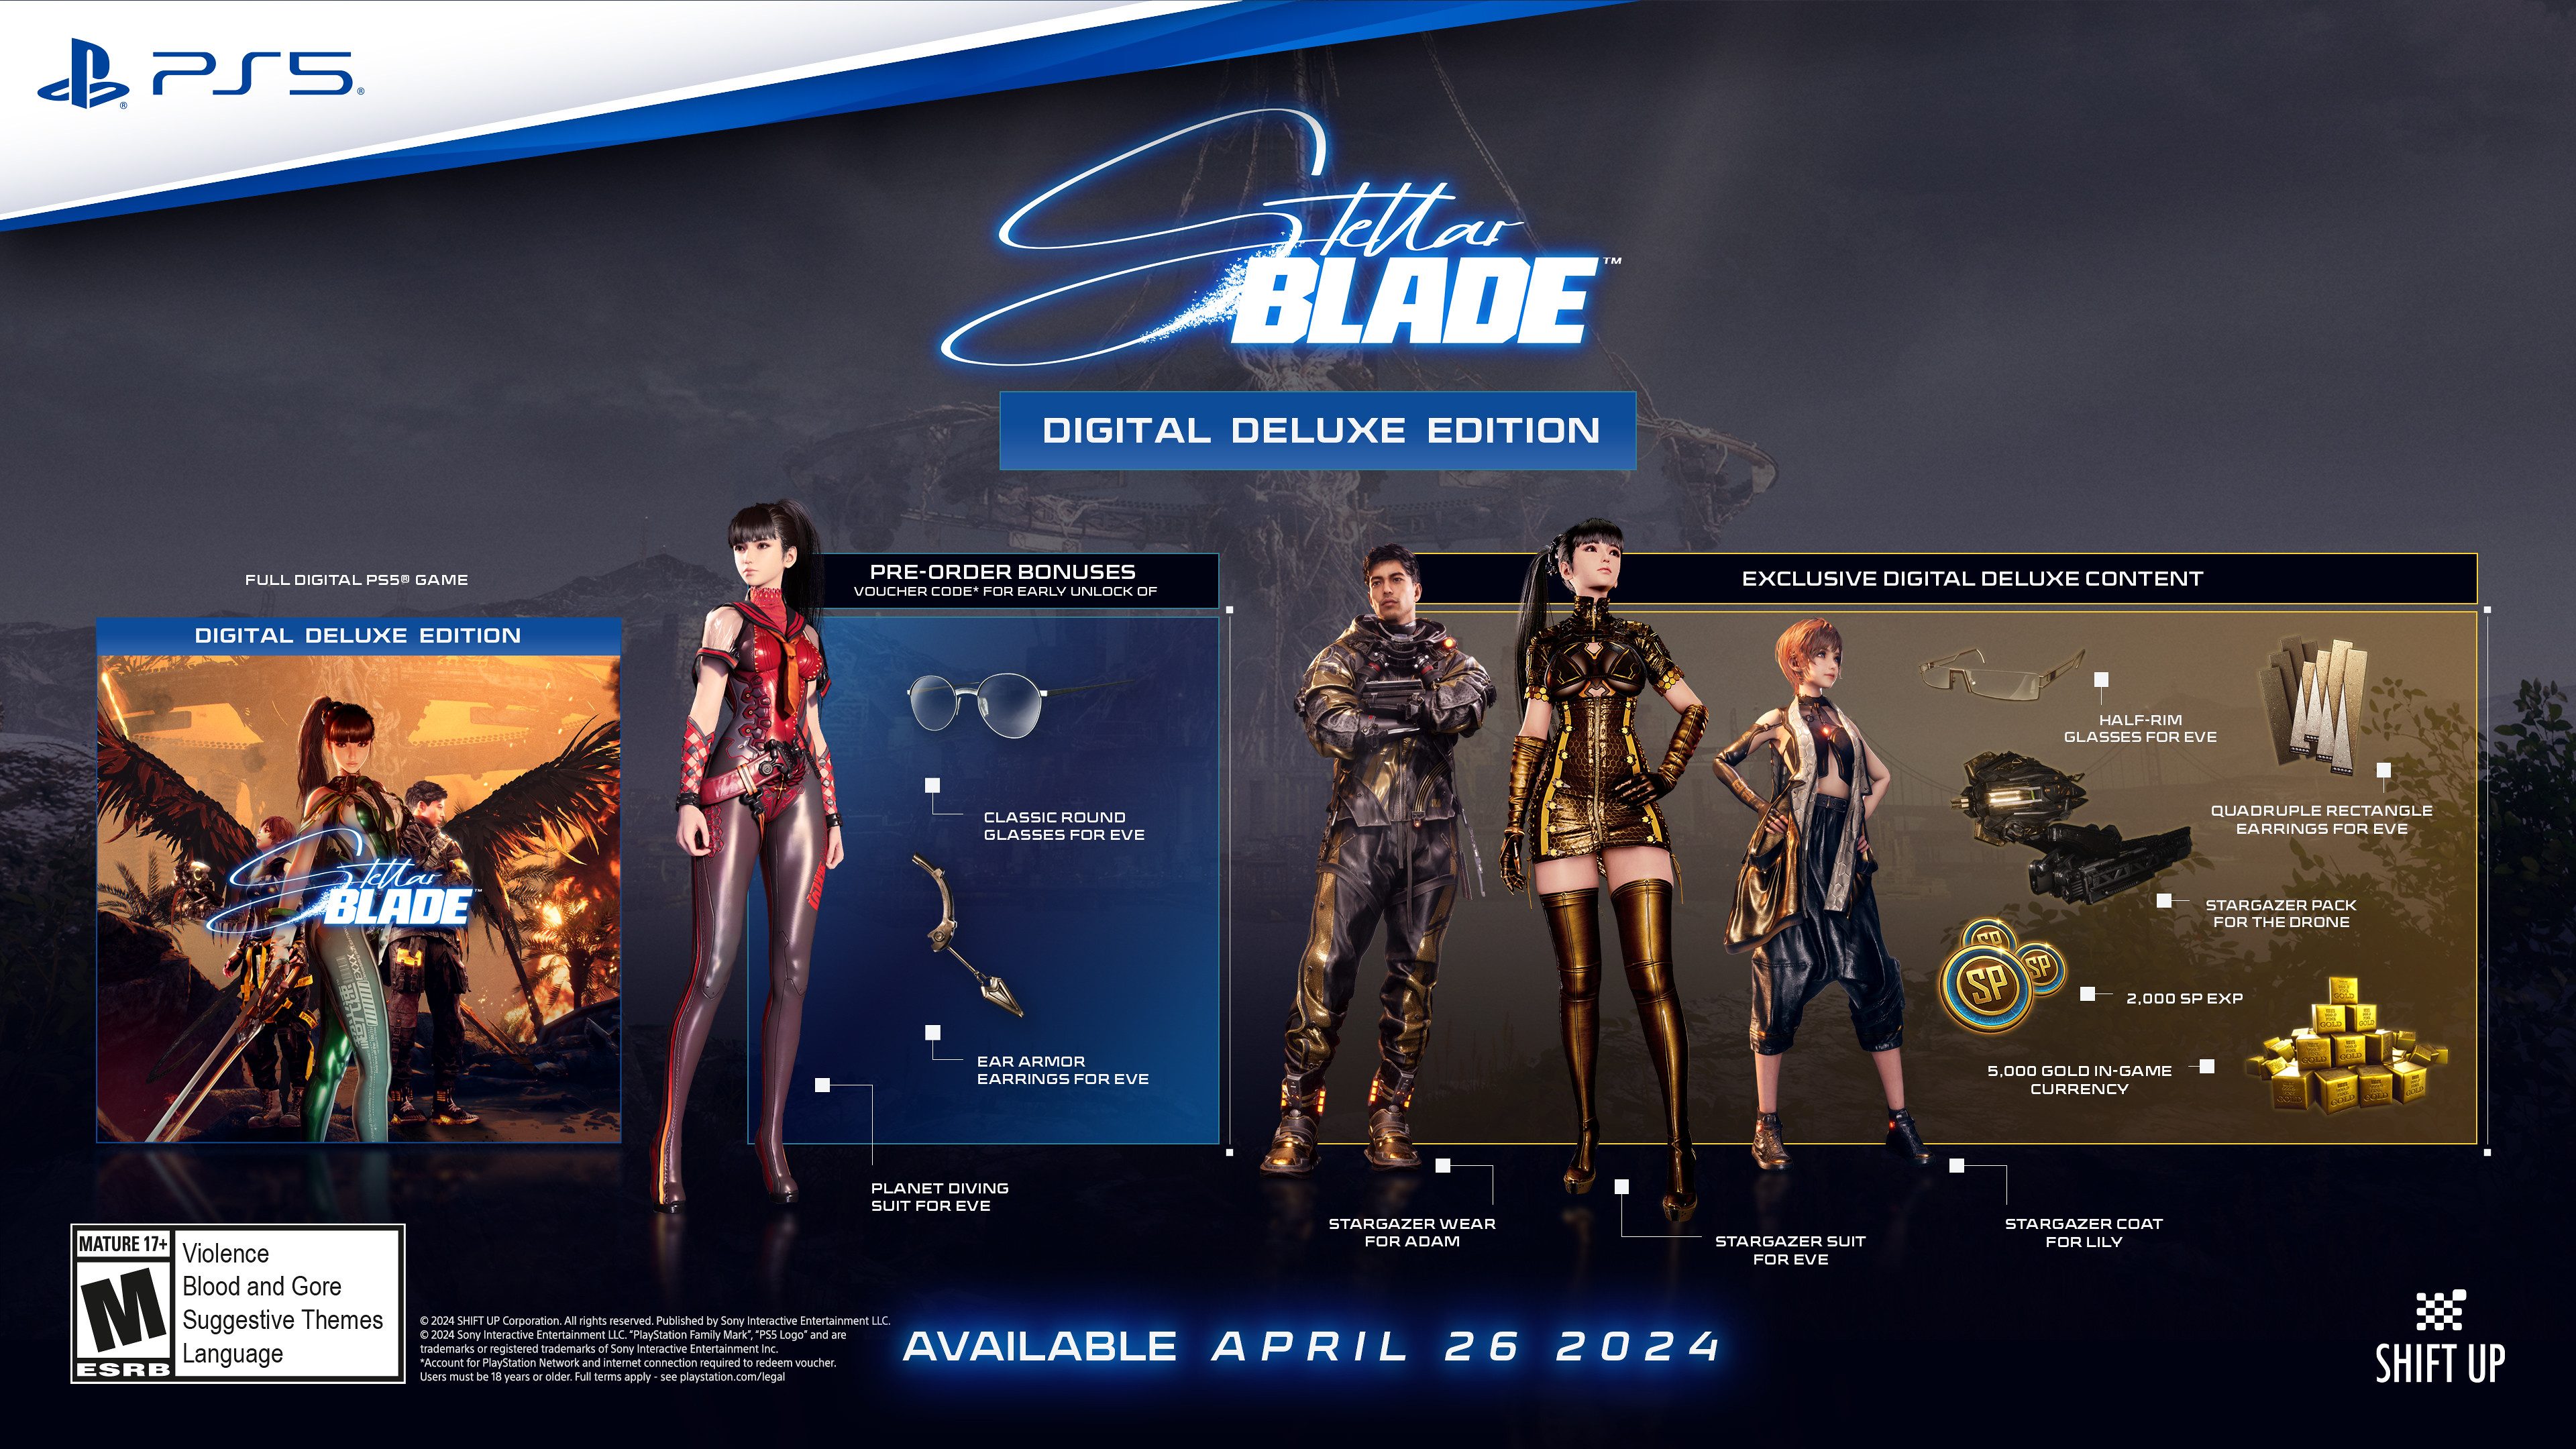 The Digital Deluxe Edition of Stellar Blade